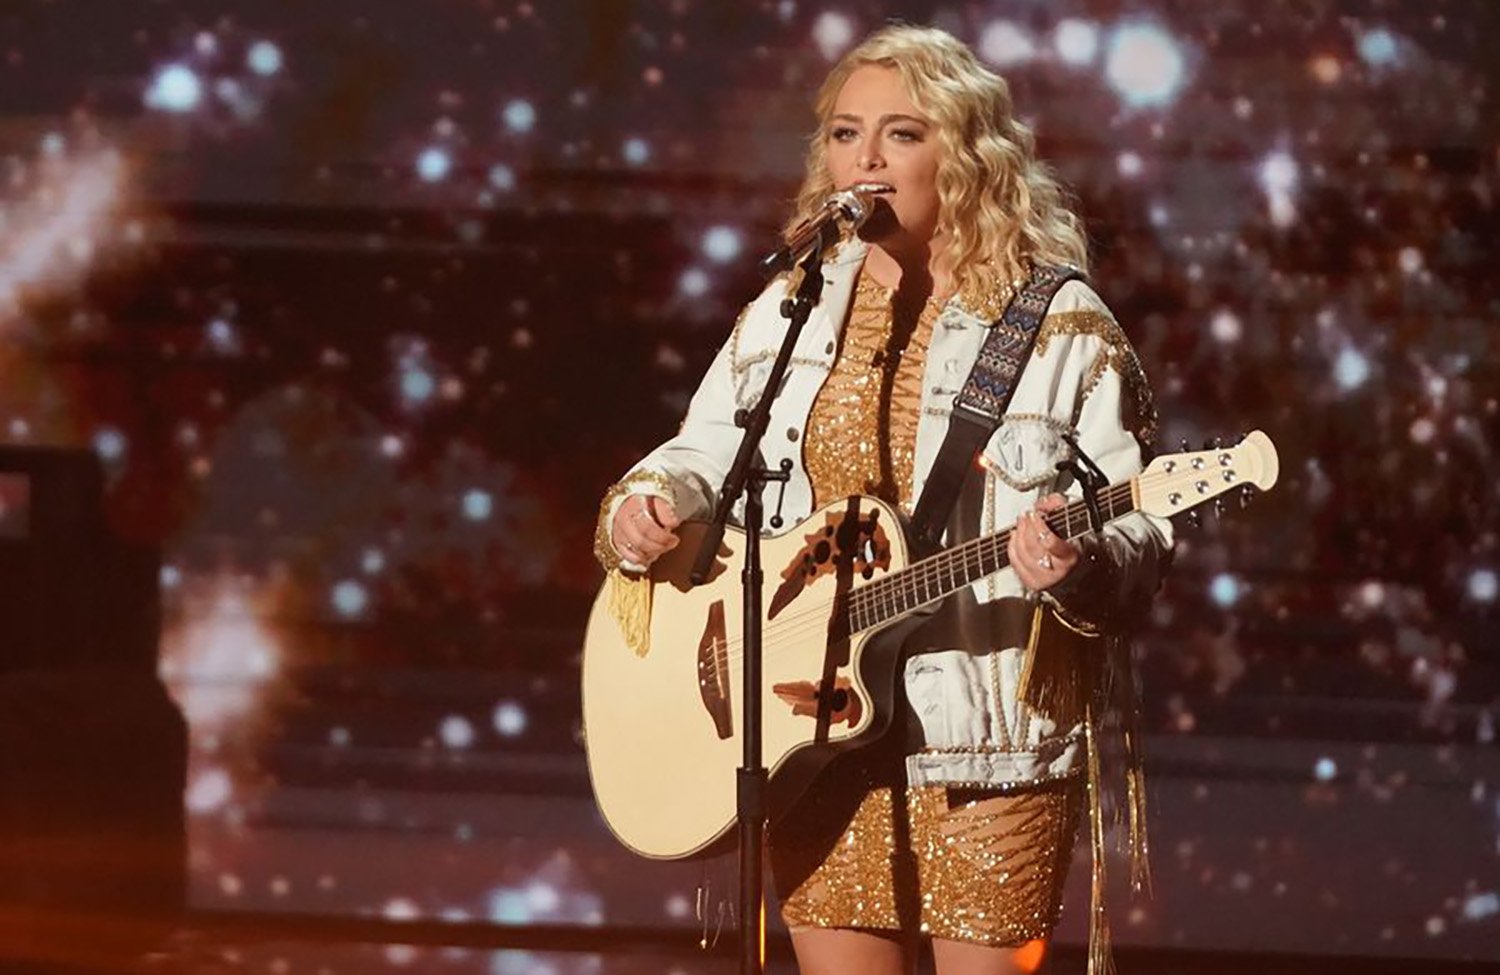 HunterGirl performs during the American Idol 2022 finale.